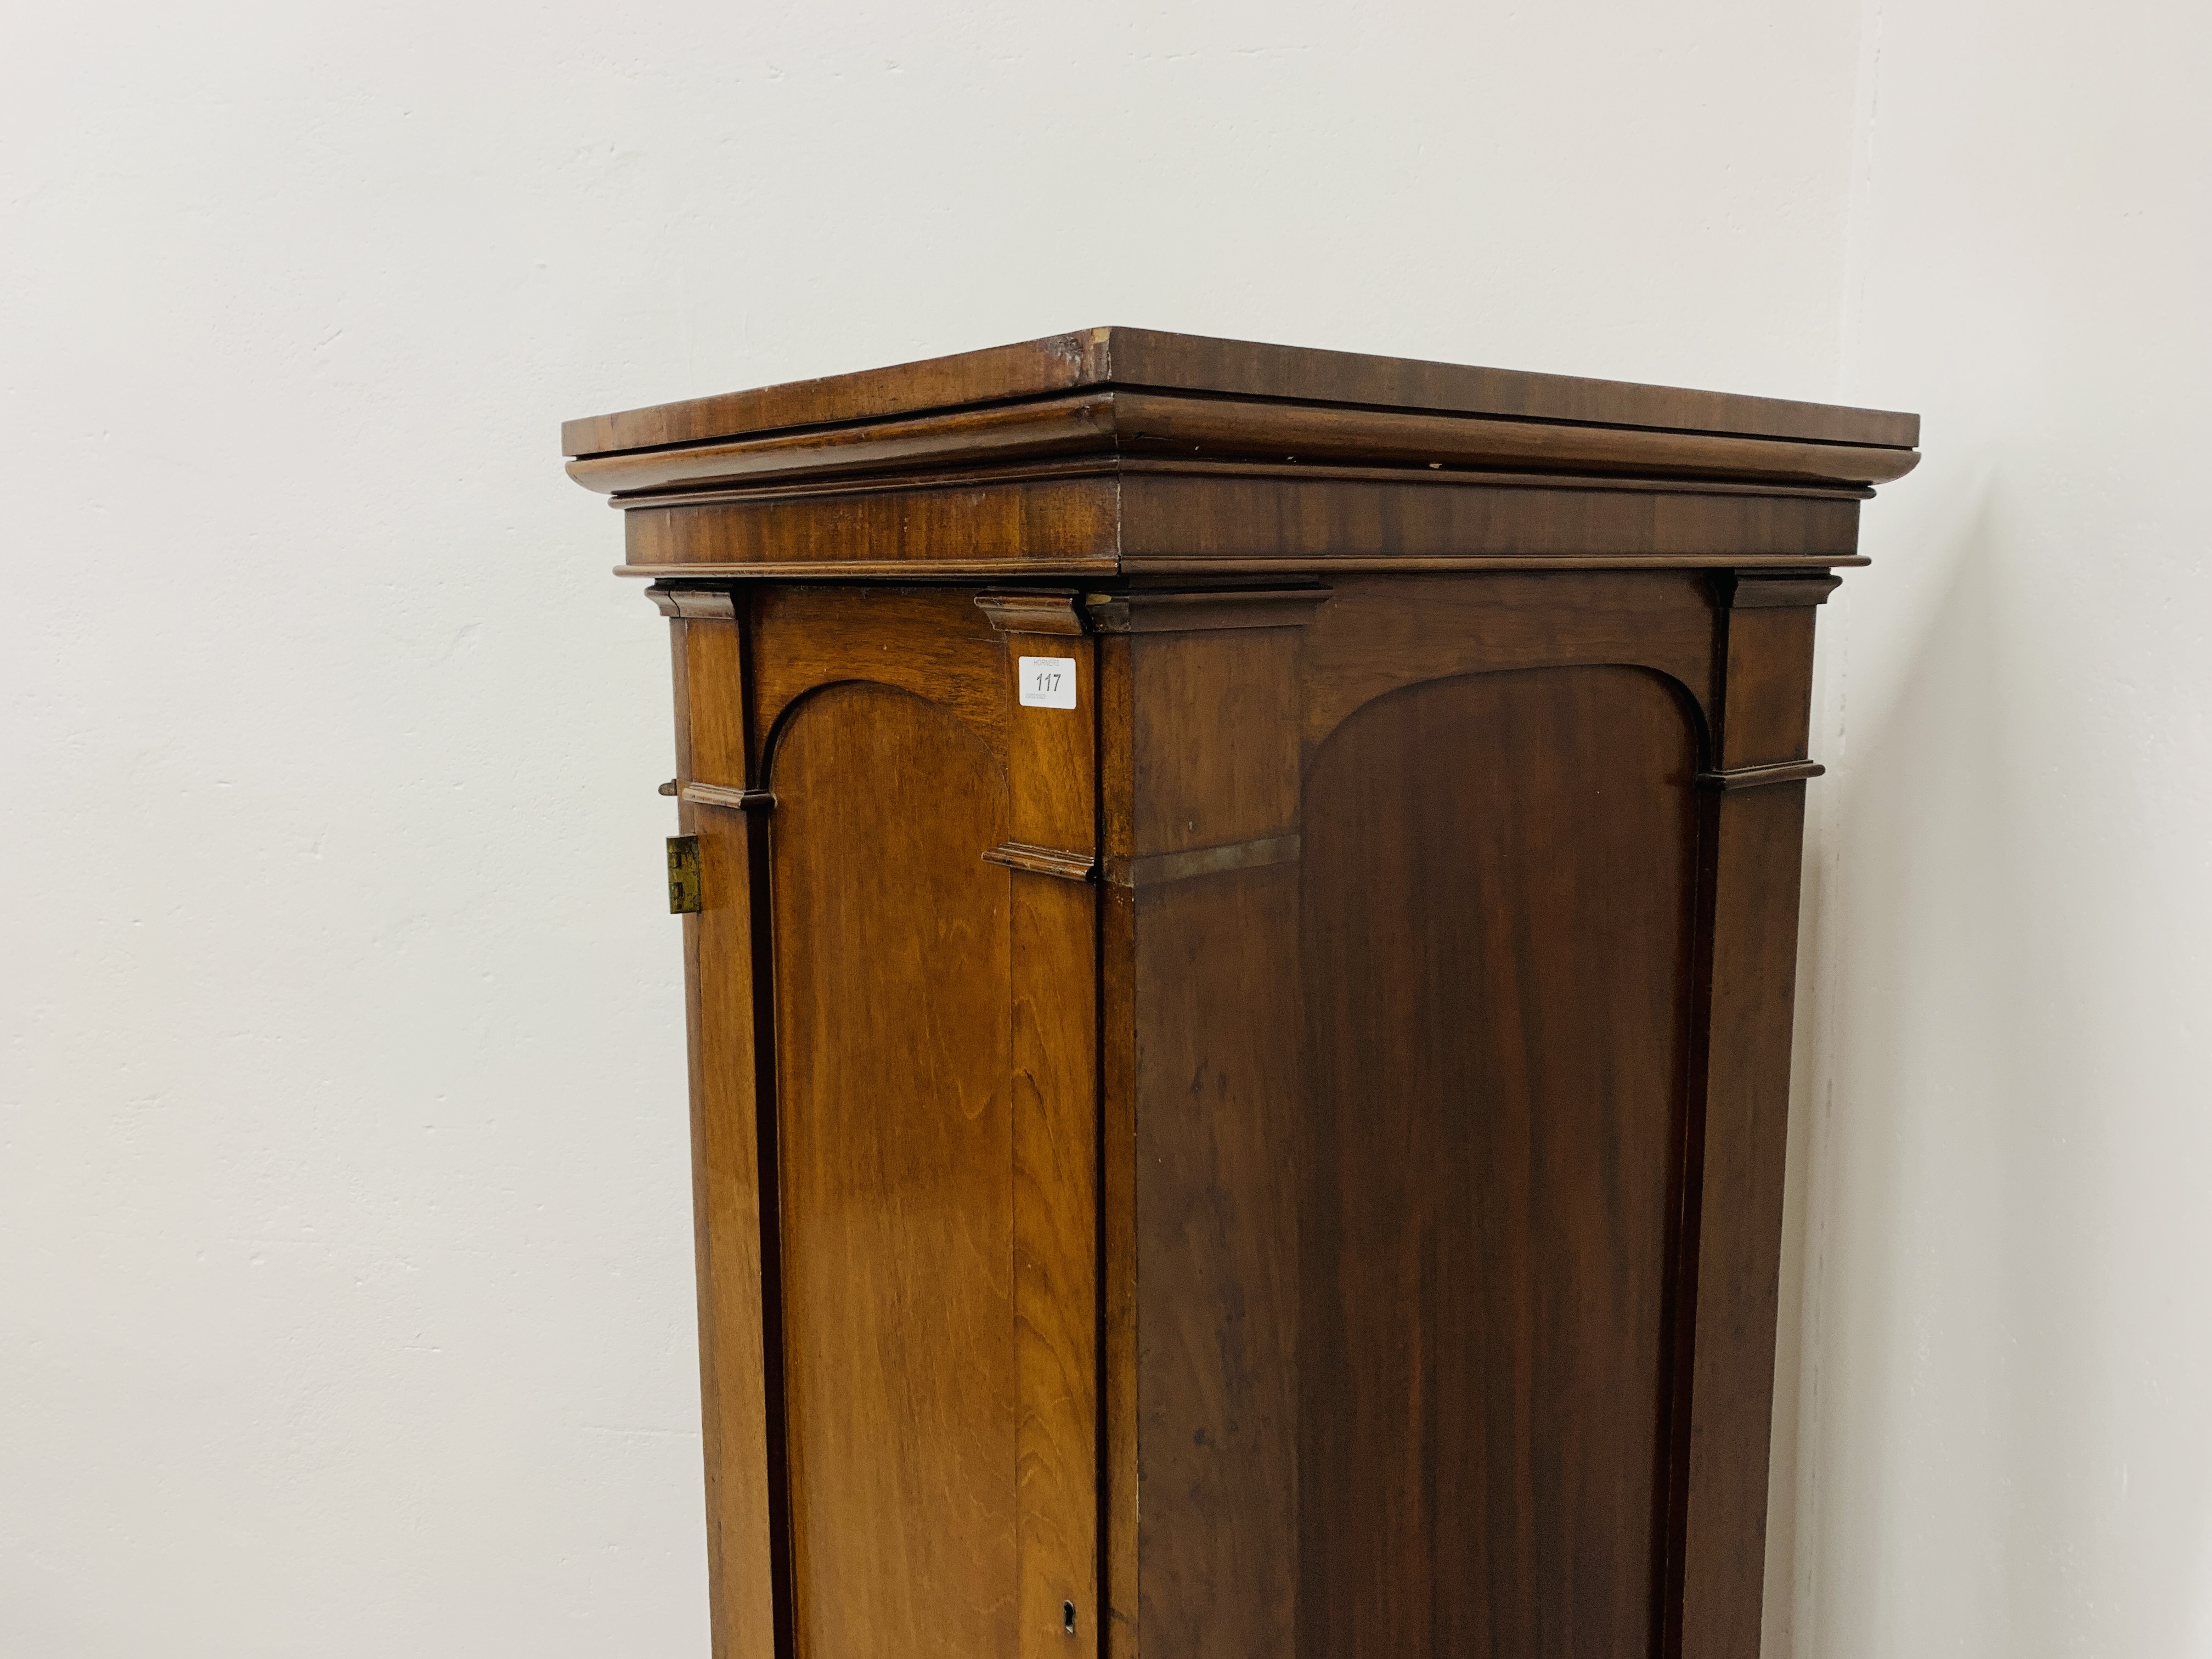 AN EARLY C19TH MAHOGANY SINGLE DOOR PEDESTAL (PART OF A LARGER PIECE) ENCLOSING SEVEN DRAWERS - Image 2 of 17